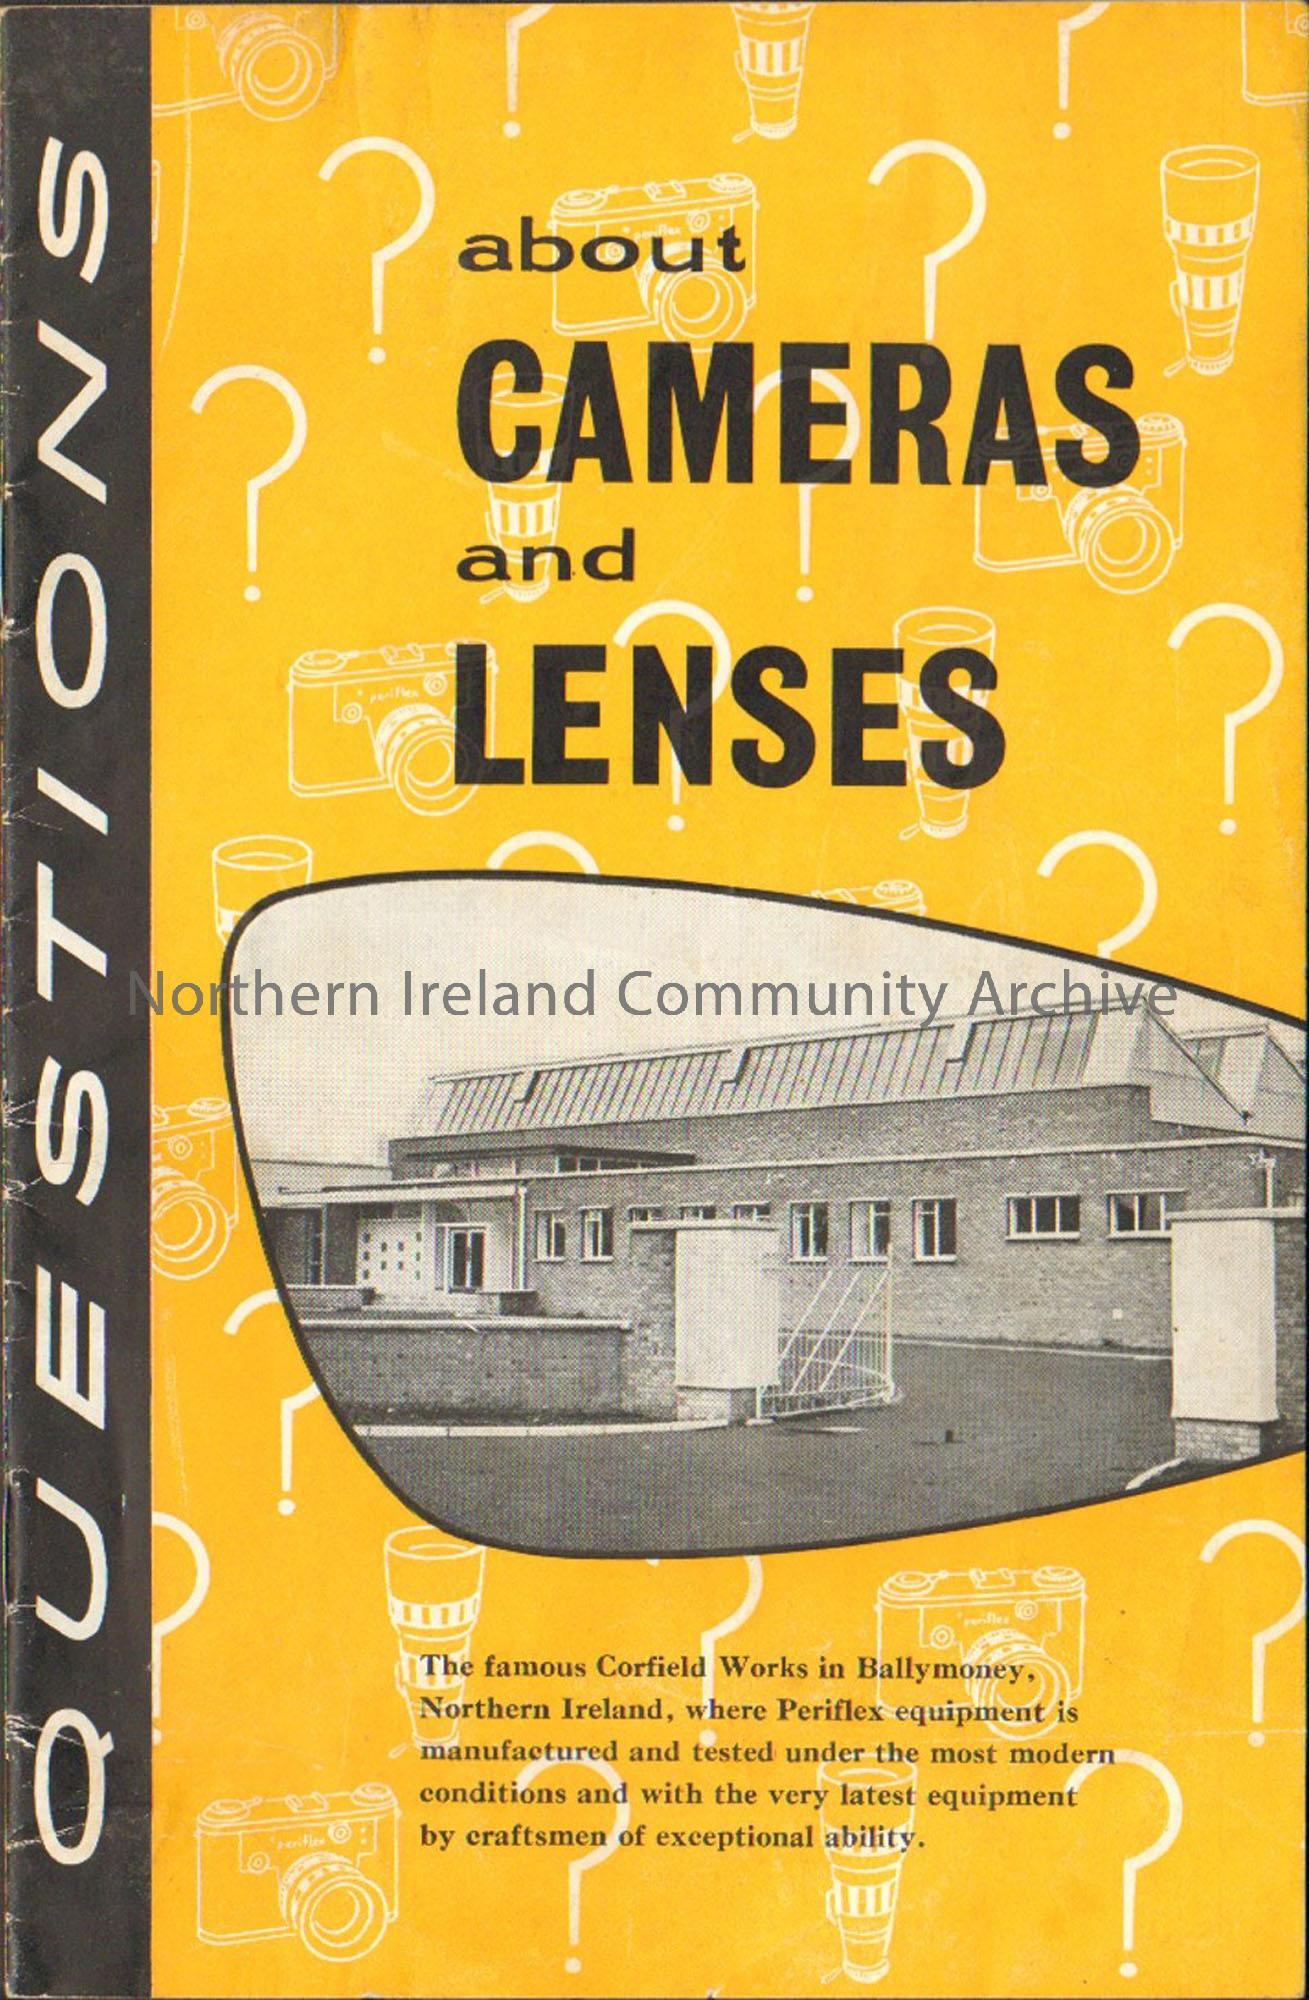 Yellow booklet “Questions about cameras and lenses” with picture of Corfield Factory, Ballymoney on the front